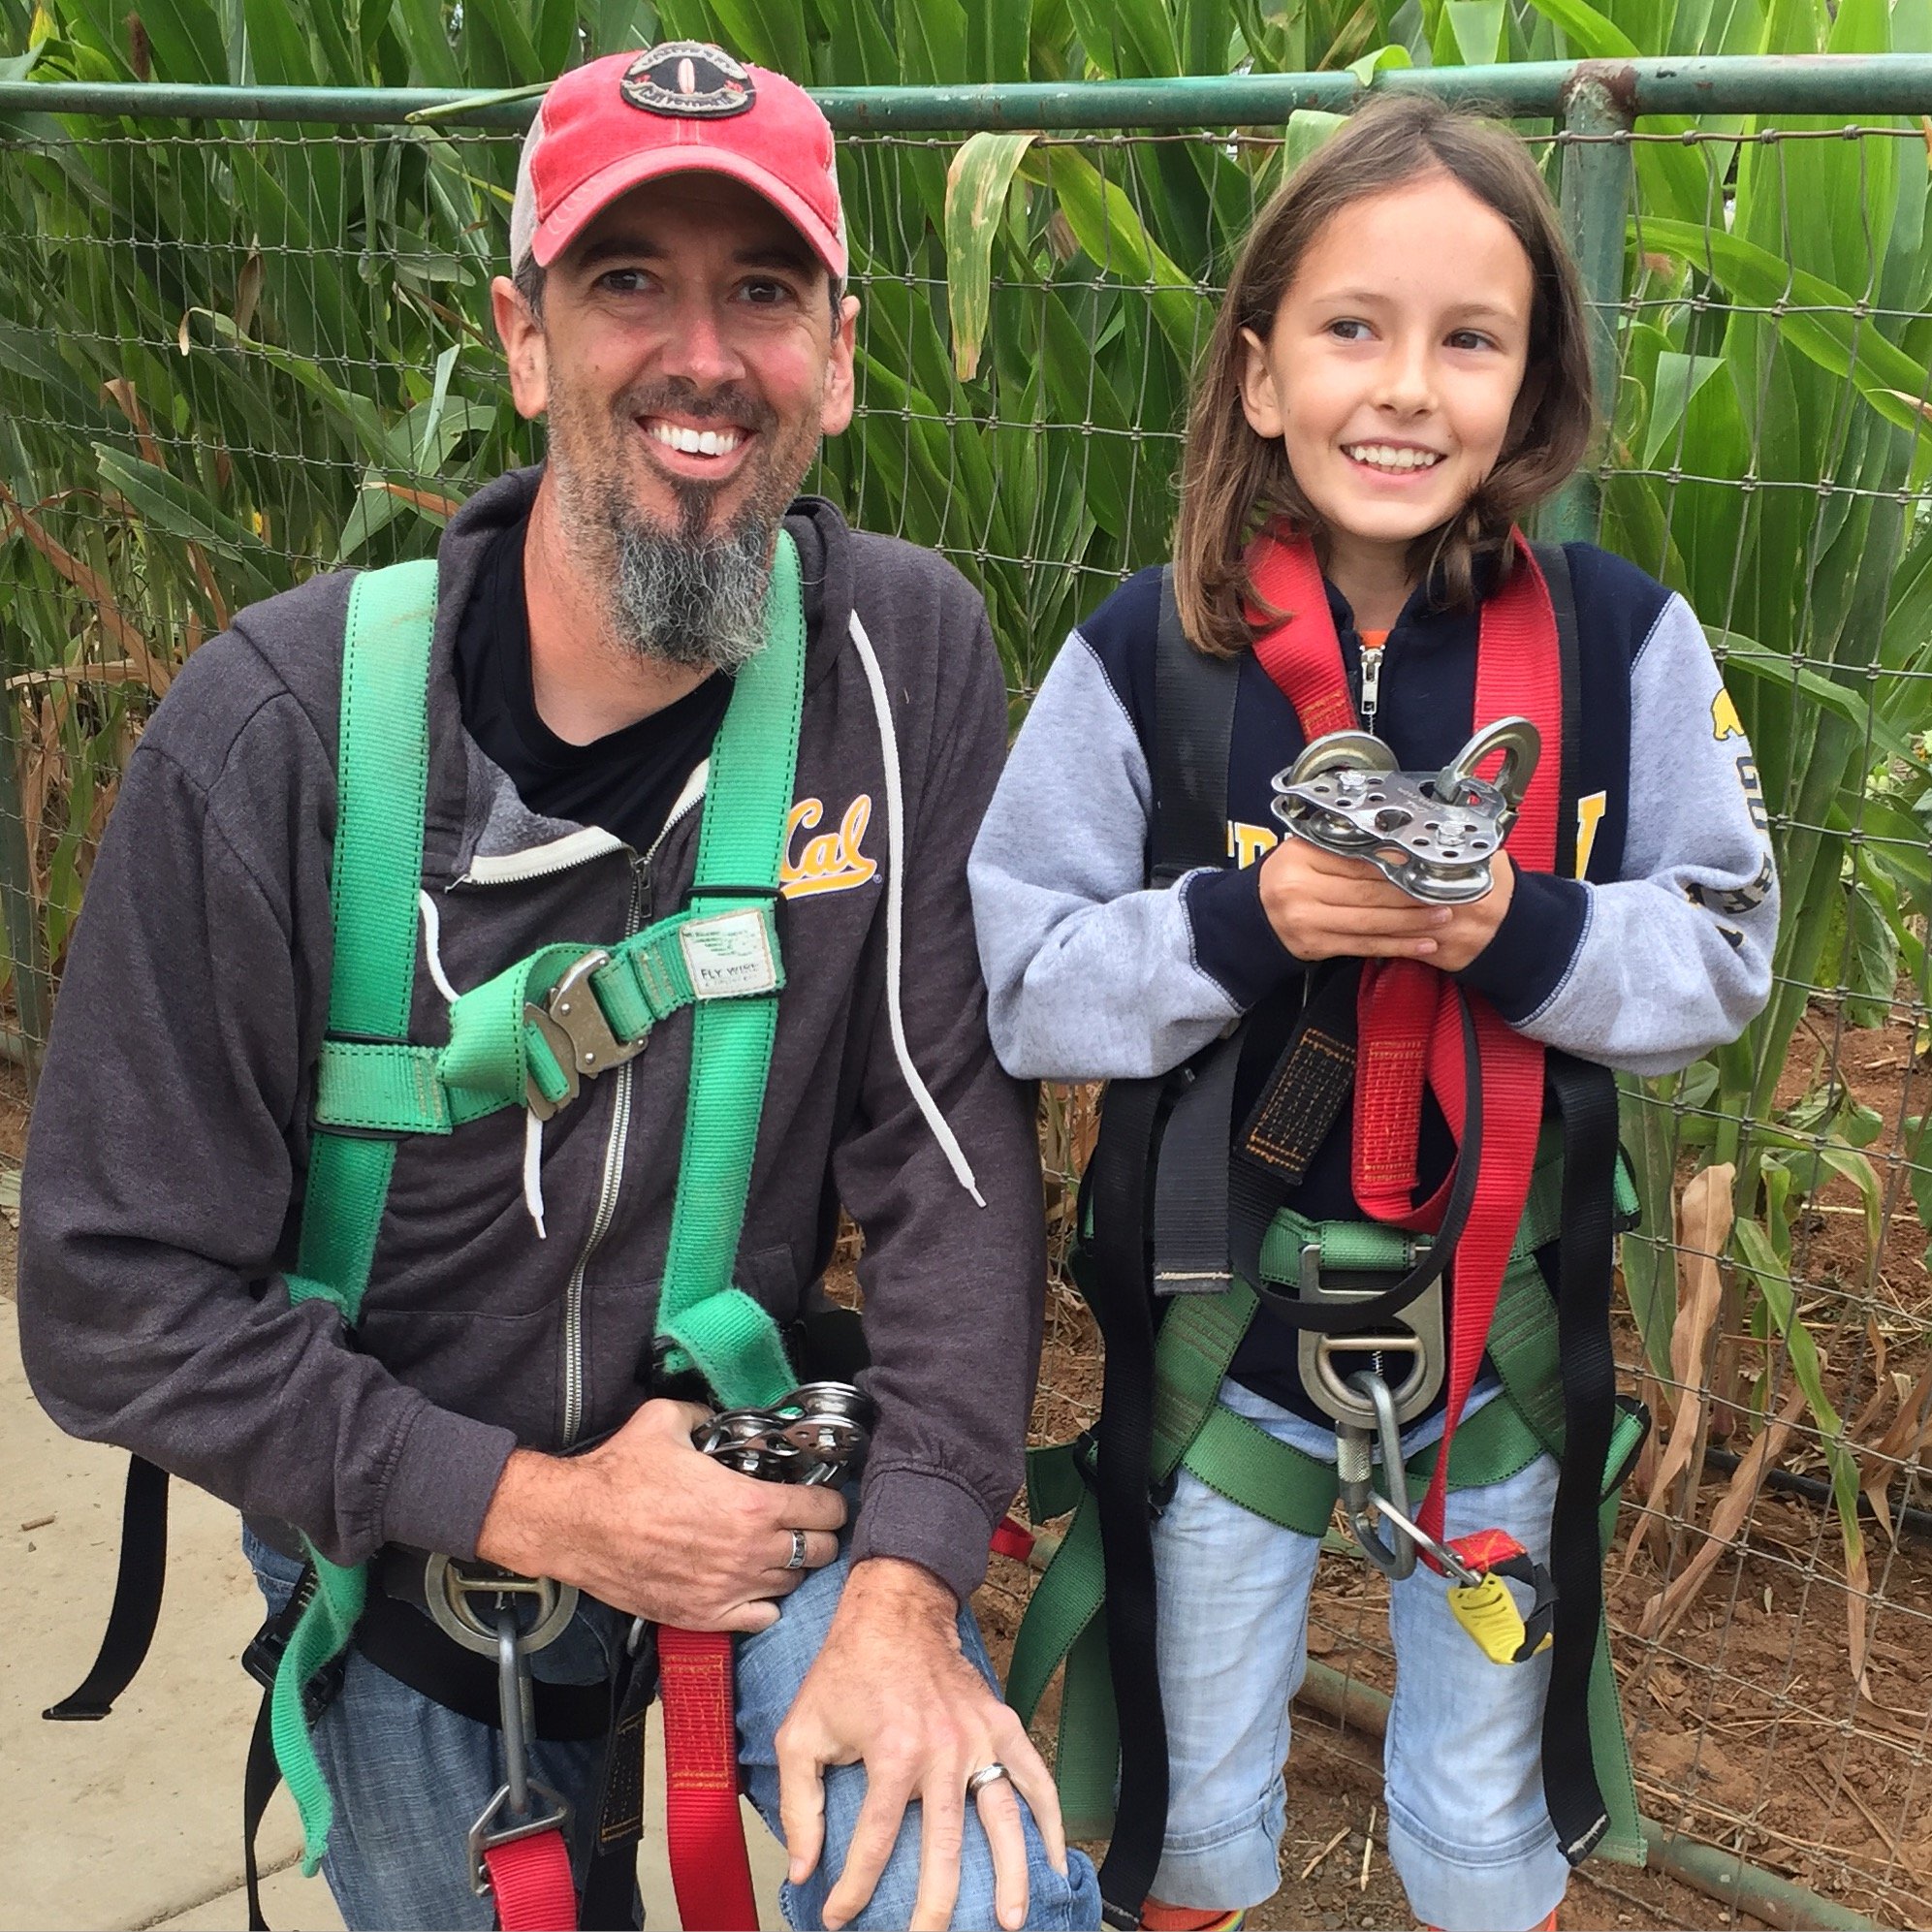   2015 – Last year, our pumpkin patch had a zip line  